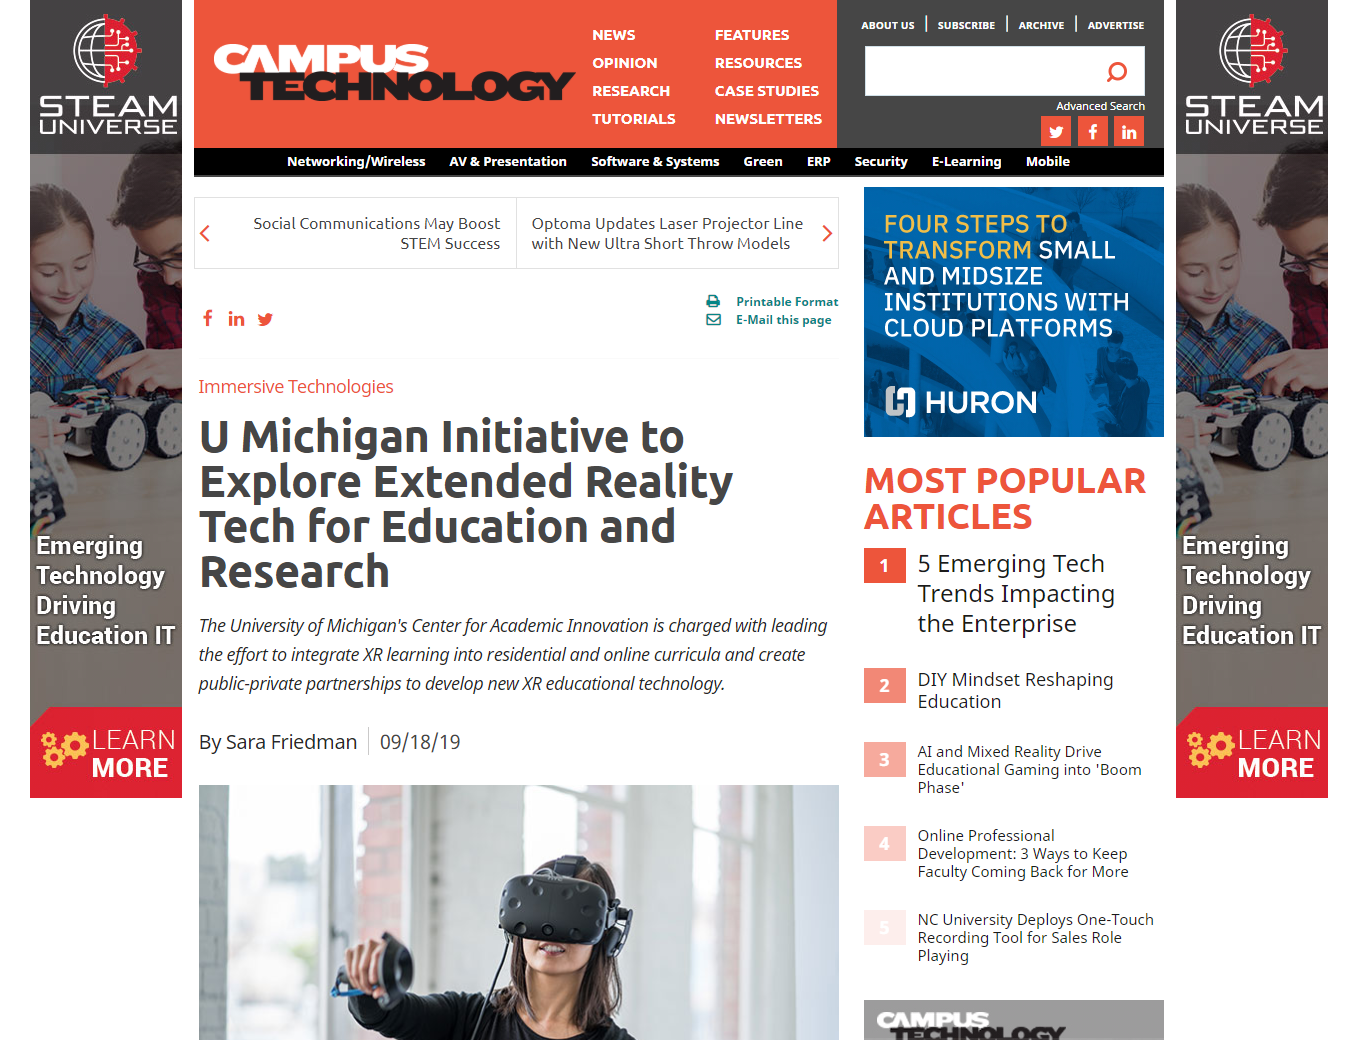 U Michigan Initiative to Explore Extended Reality Tech for Education and Research